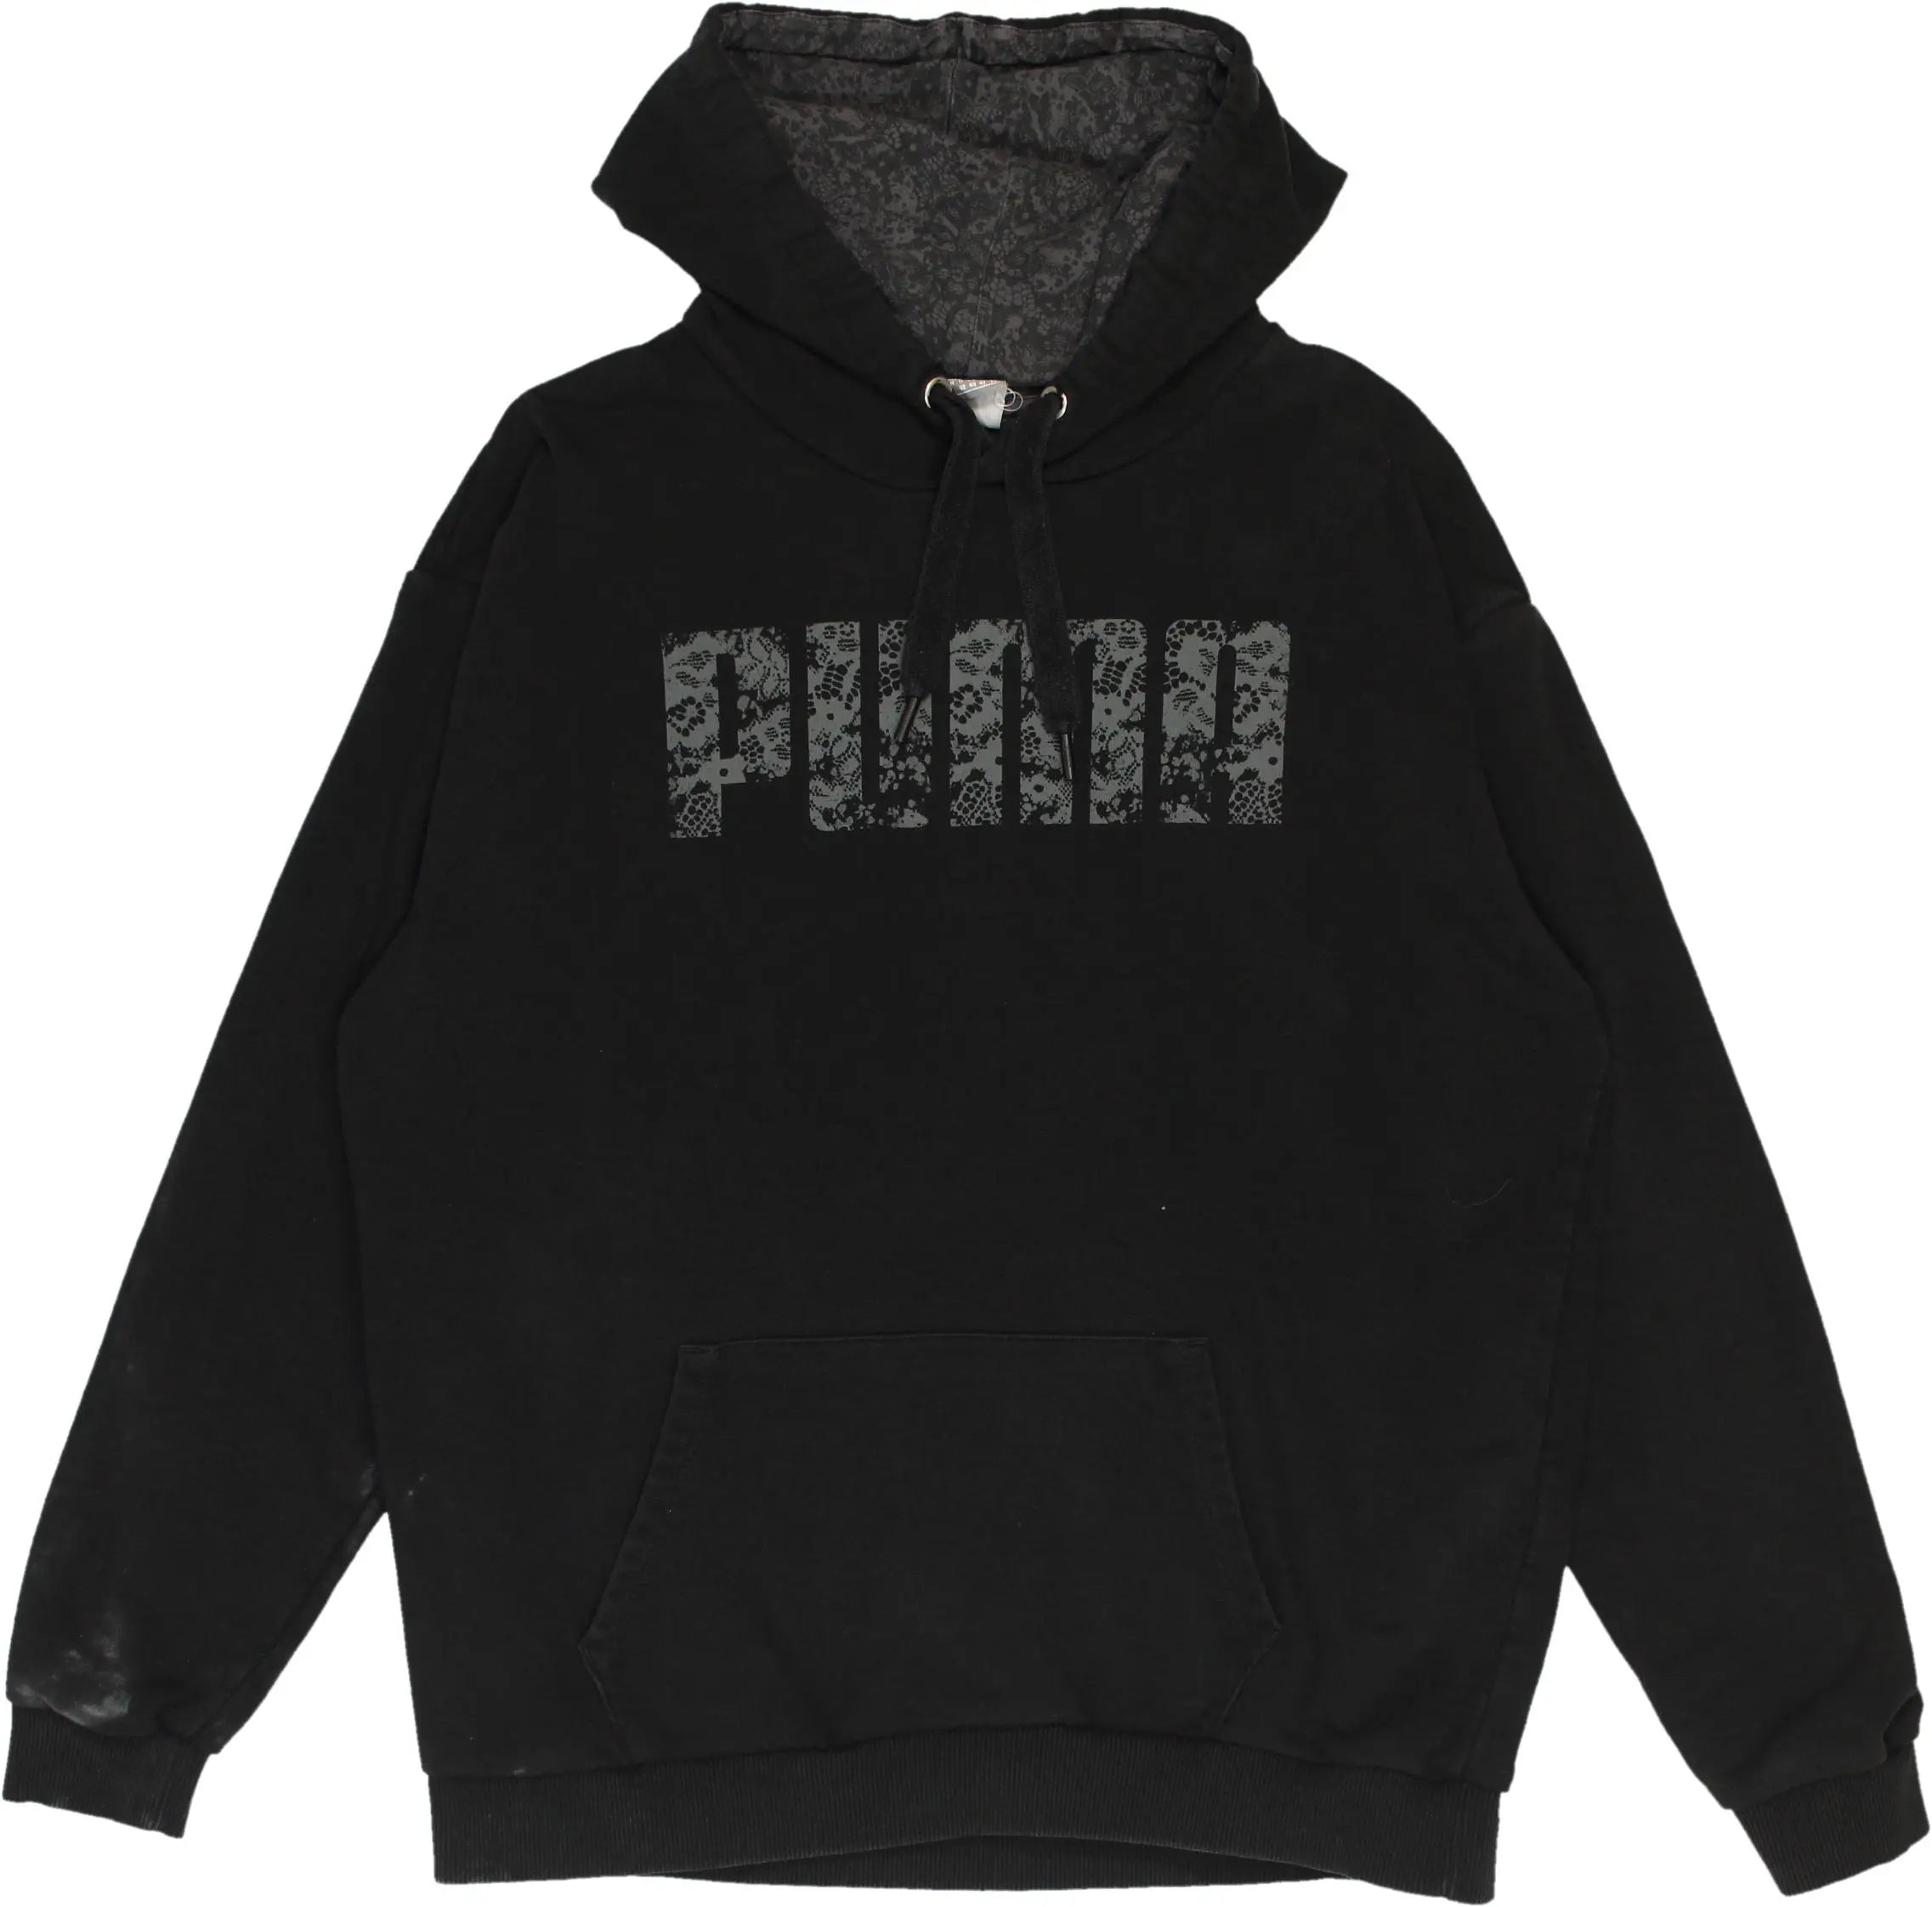 Puma - Black Hoodie by Puma- ThriftTale.com - Vintage and second handclothing